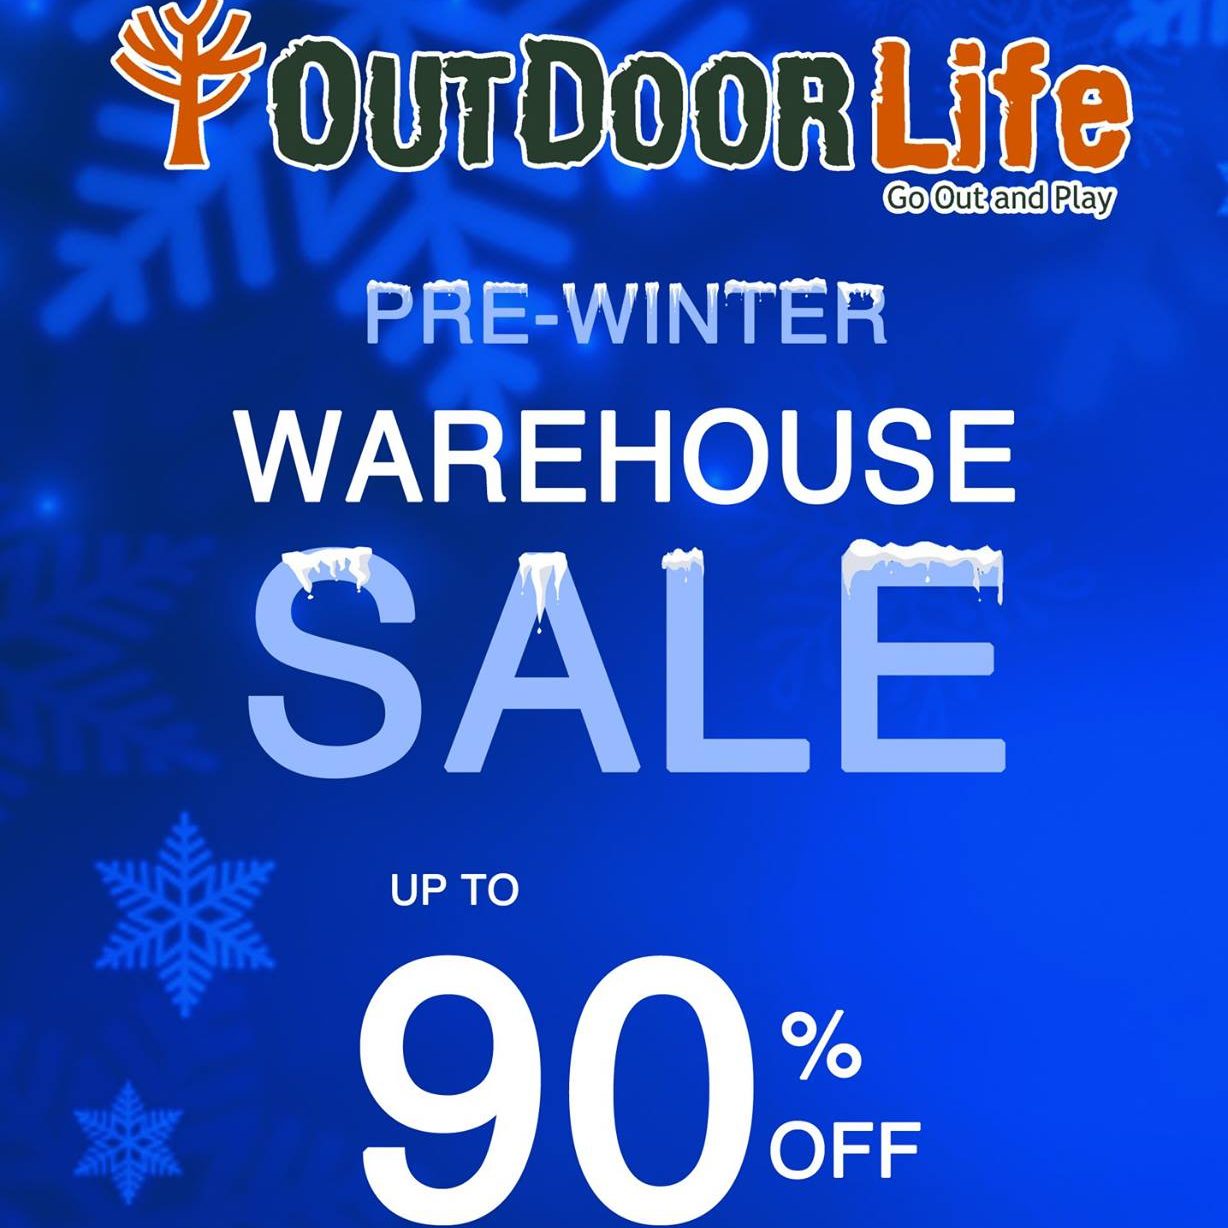 Outdoor Life Singapore Pre-Winter Warehouse Sale 90% Off Promotion 30 Sep to 2 Oct 2016